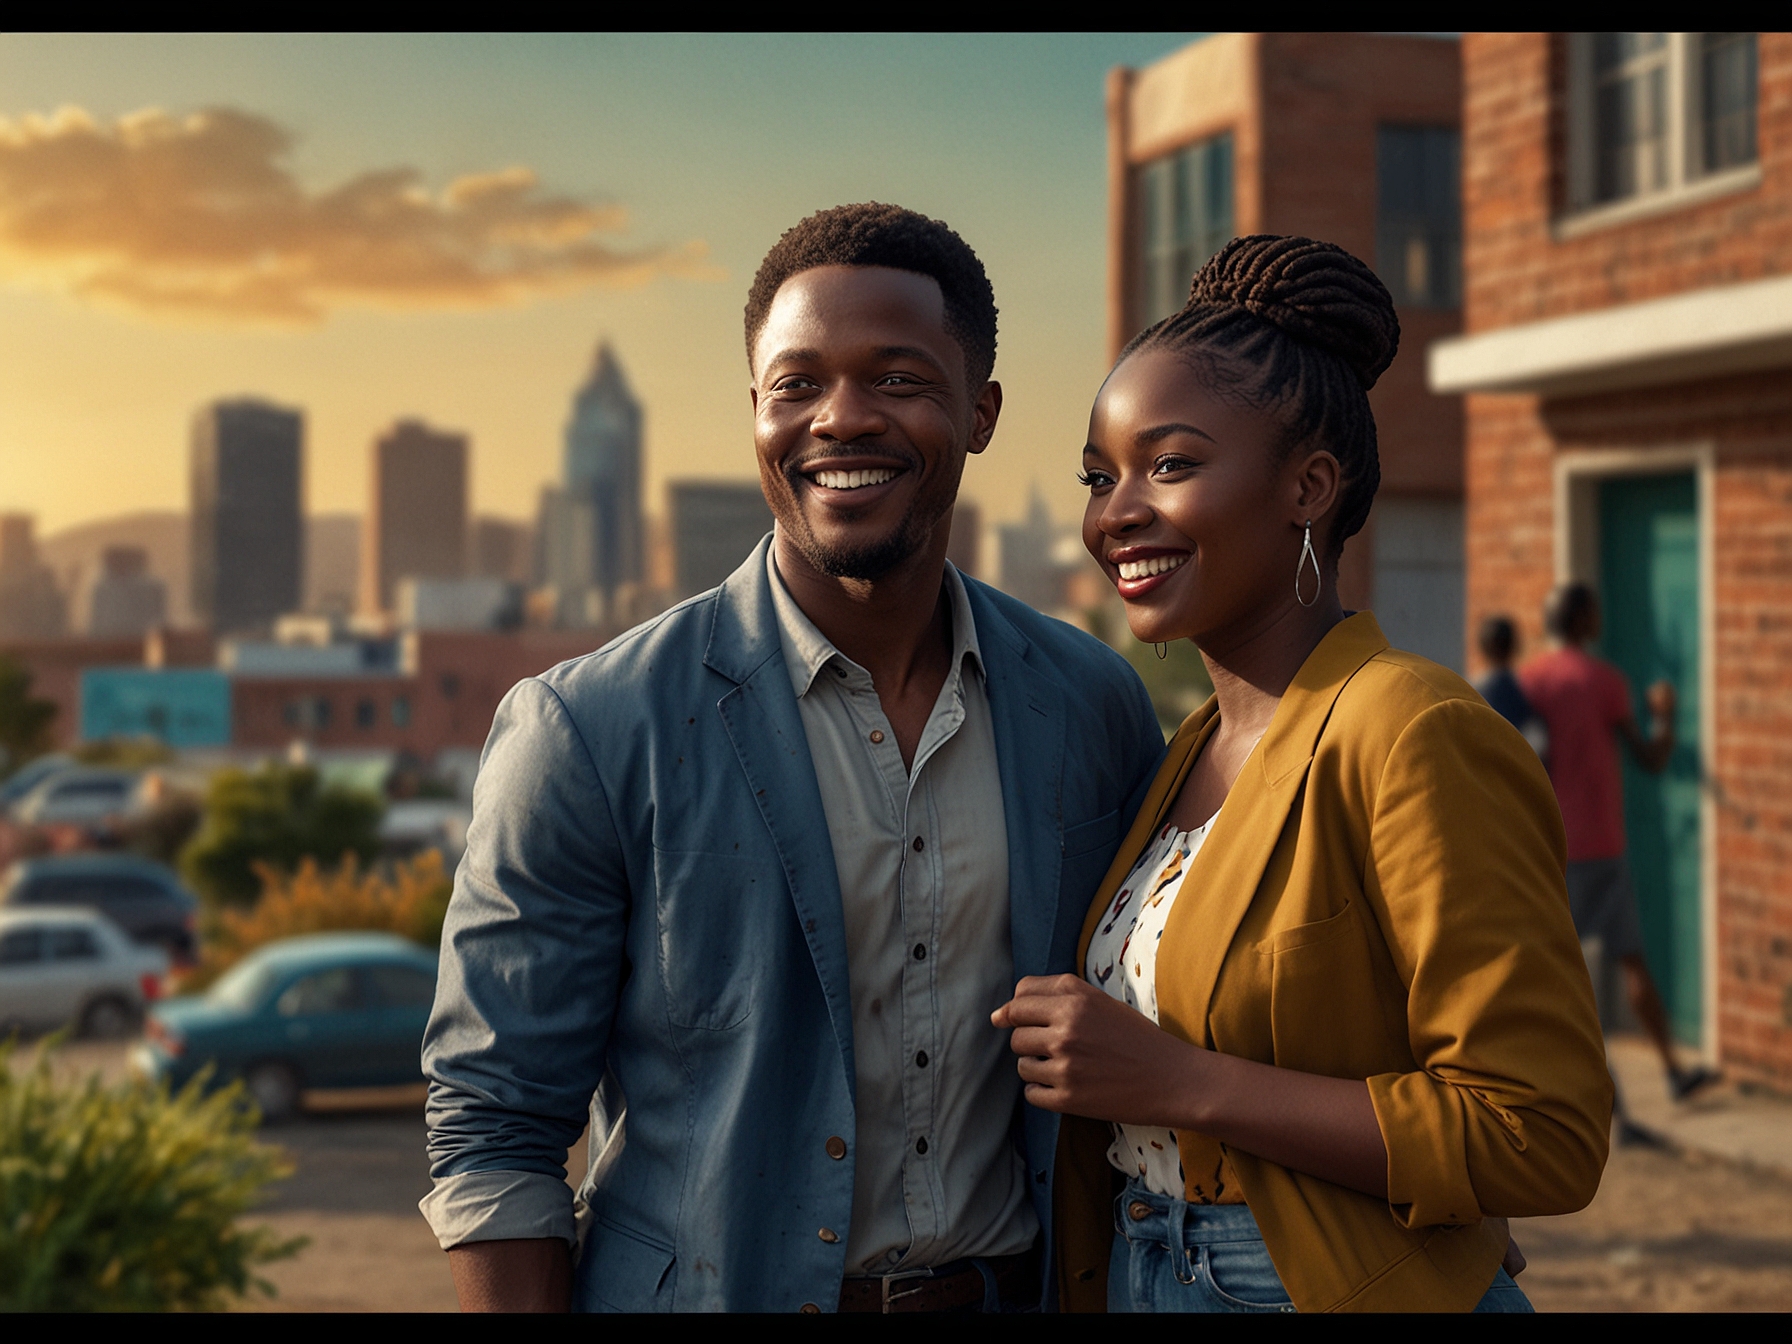 Lawrence Maleka and his co-star share a light-hearted moment, showcasing their chemistry against a vibrant South African cityscape in Netflix's Lobola Man.